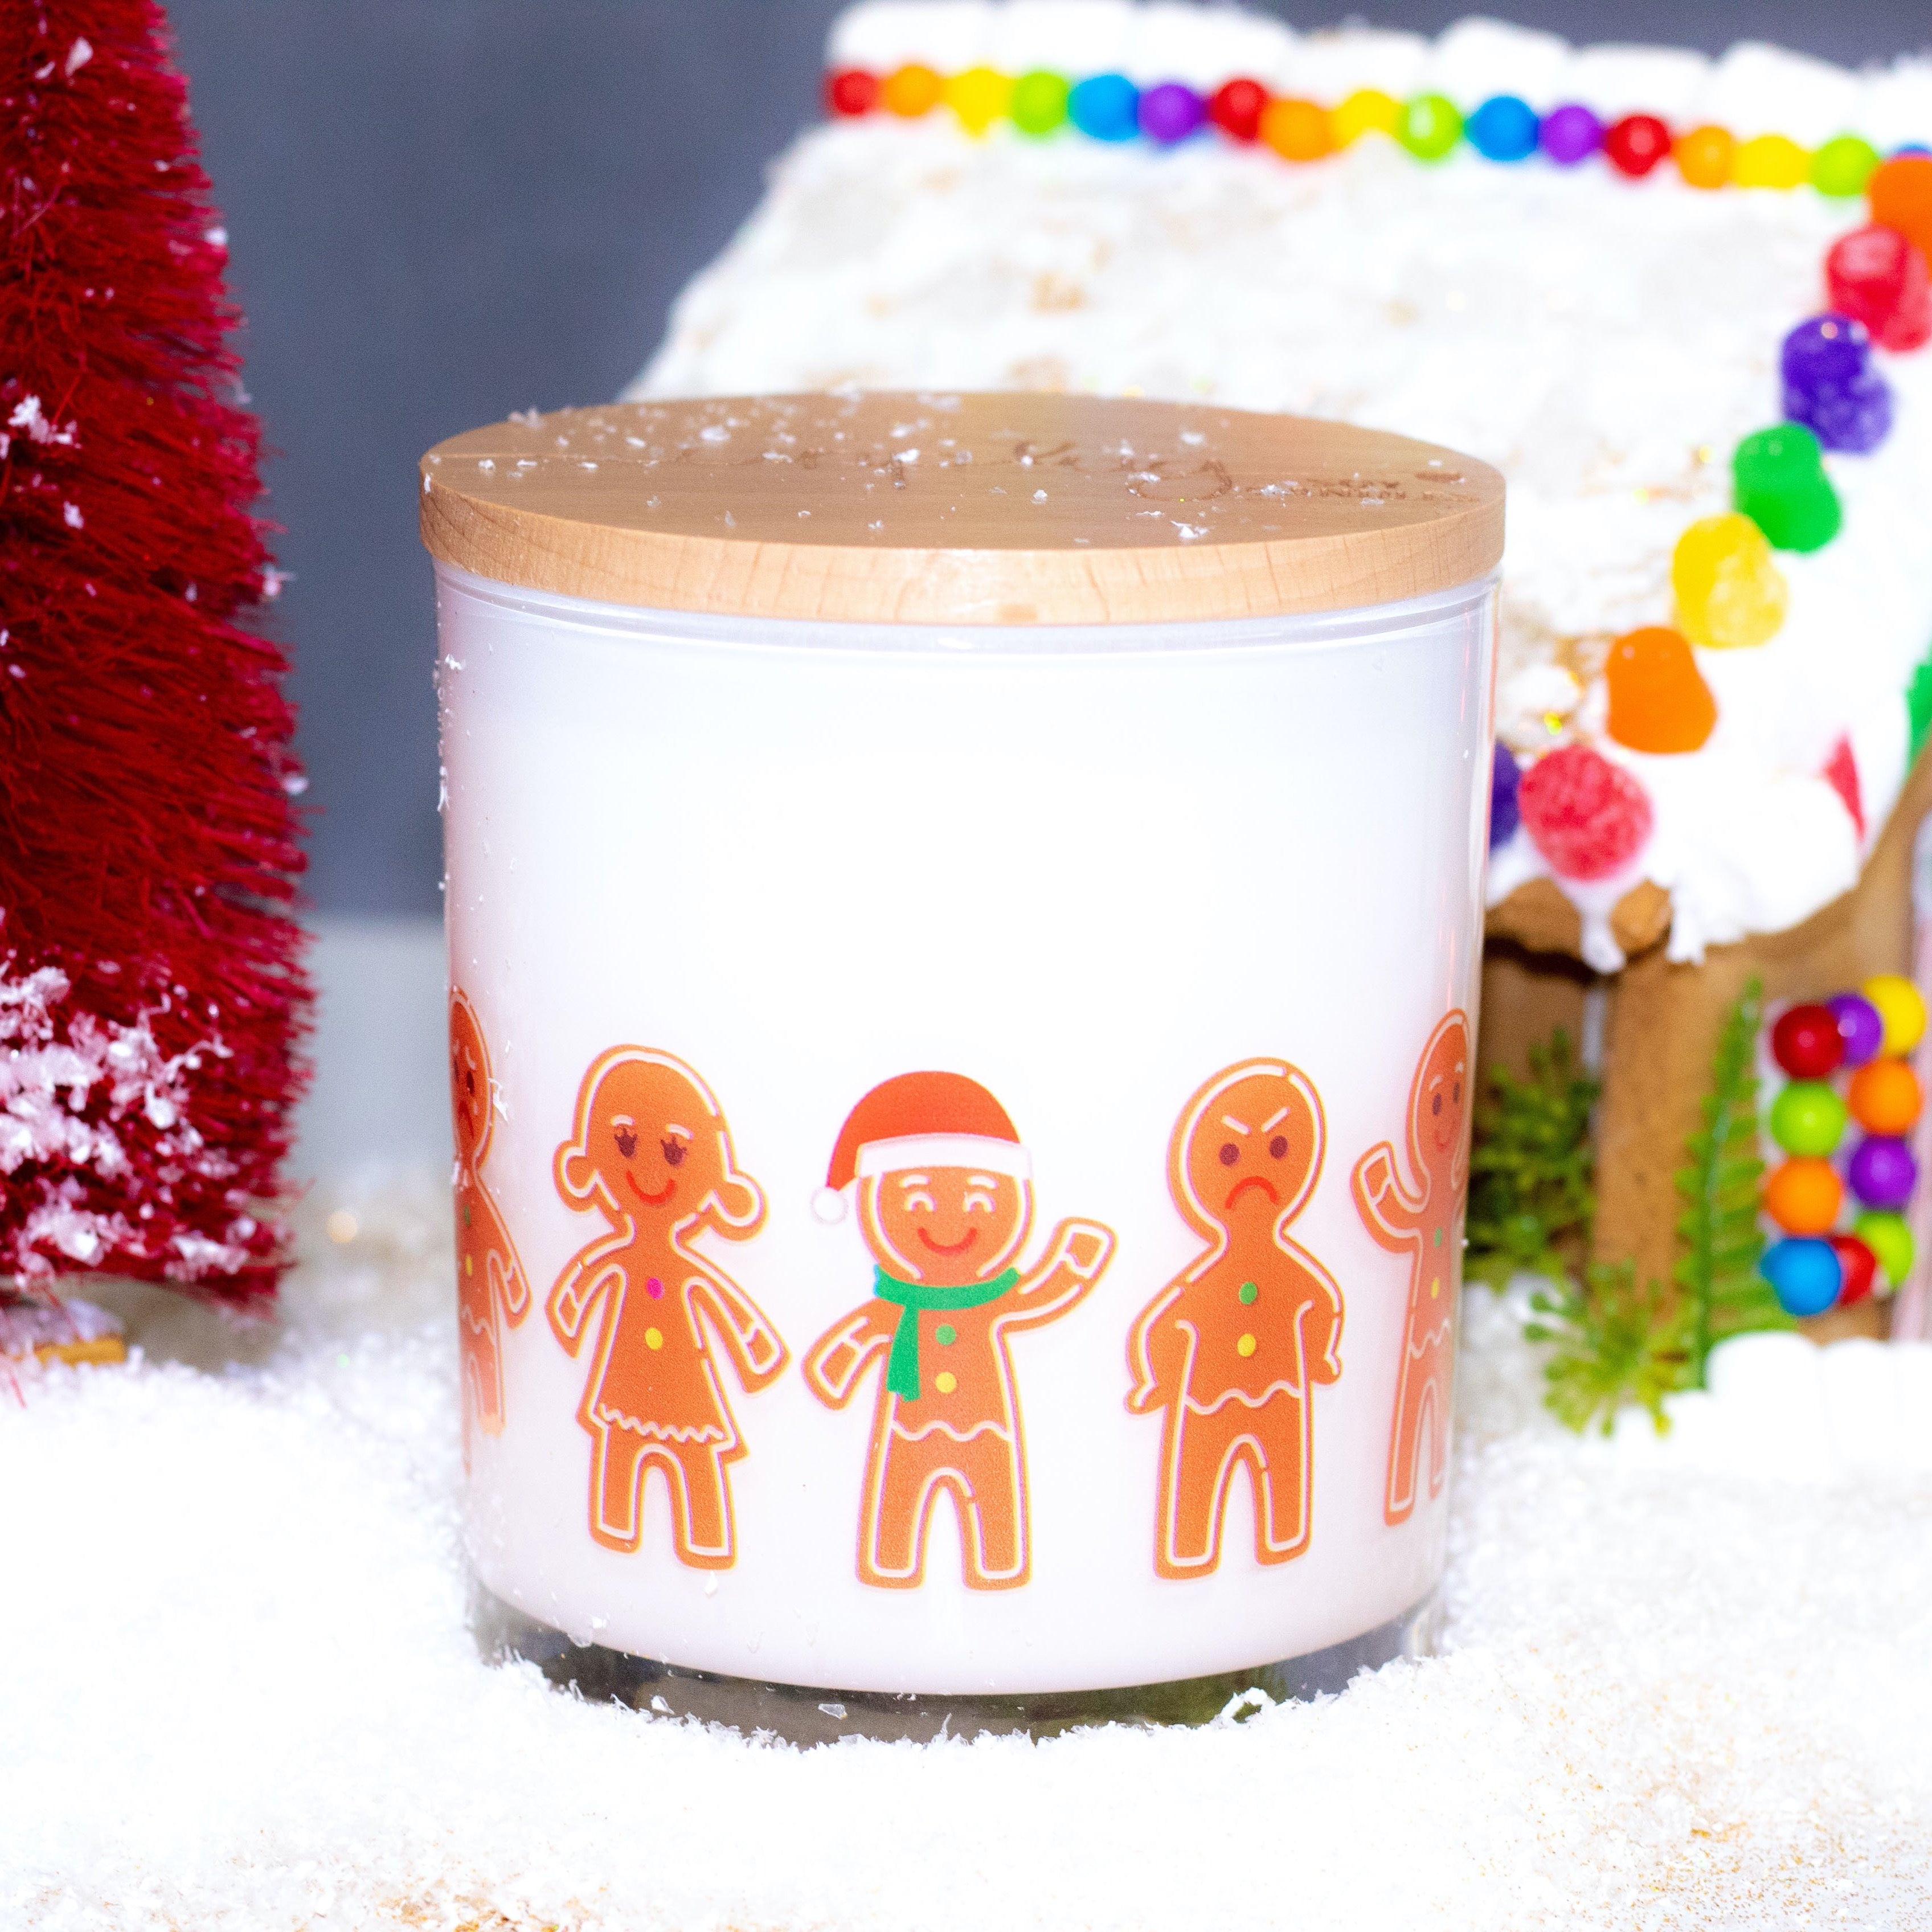 Gingerbread man candle